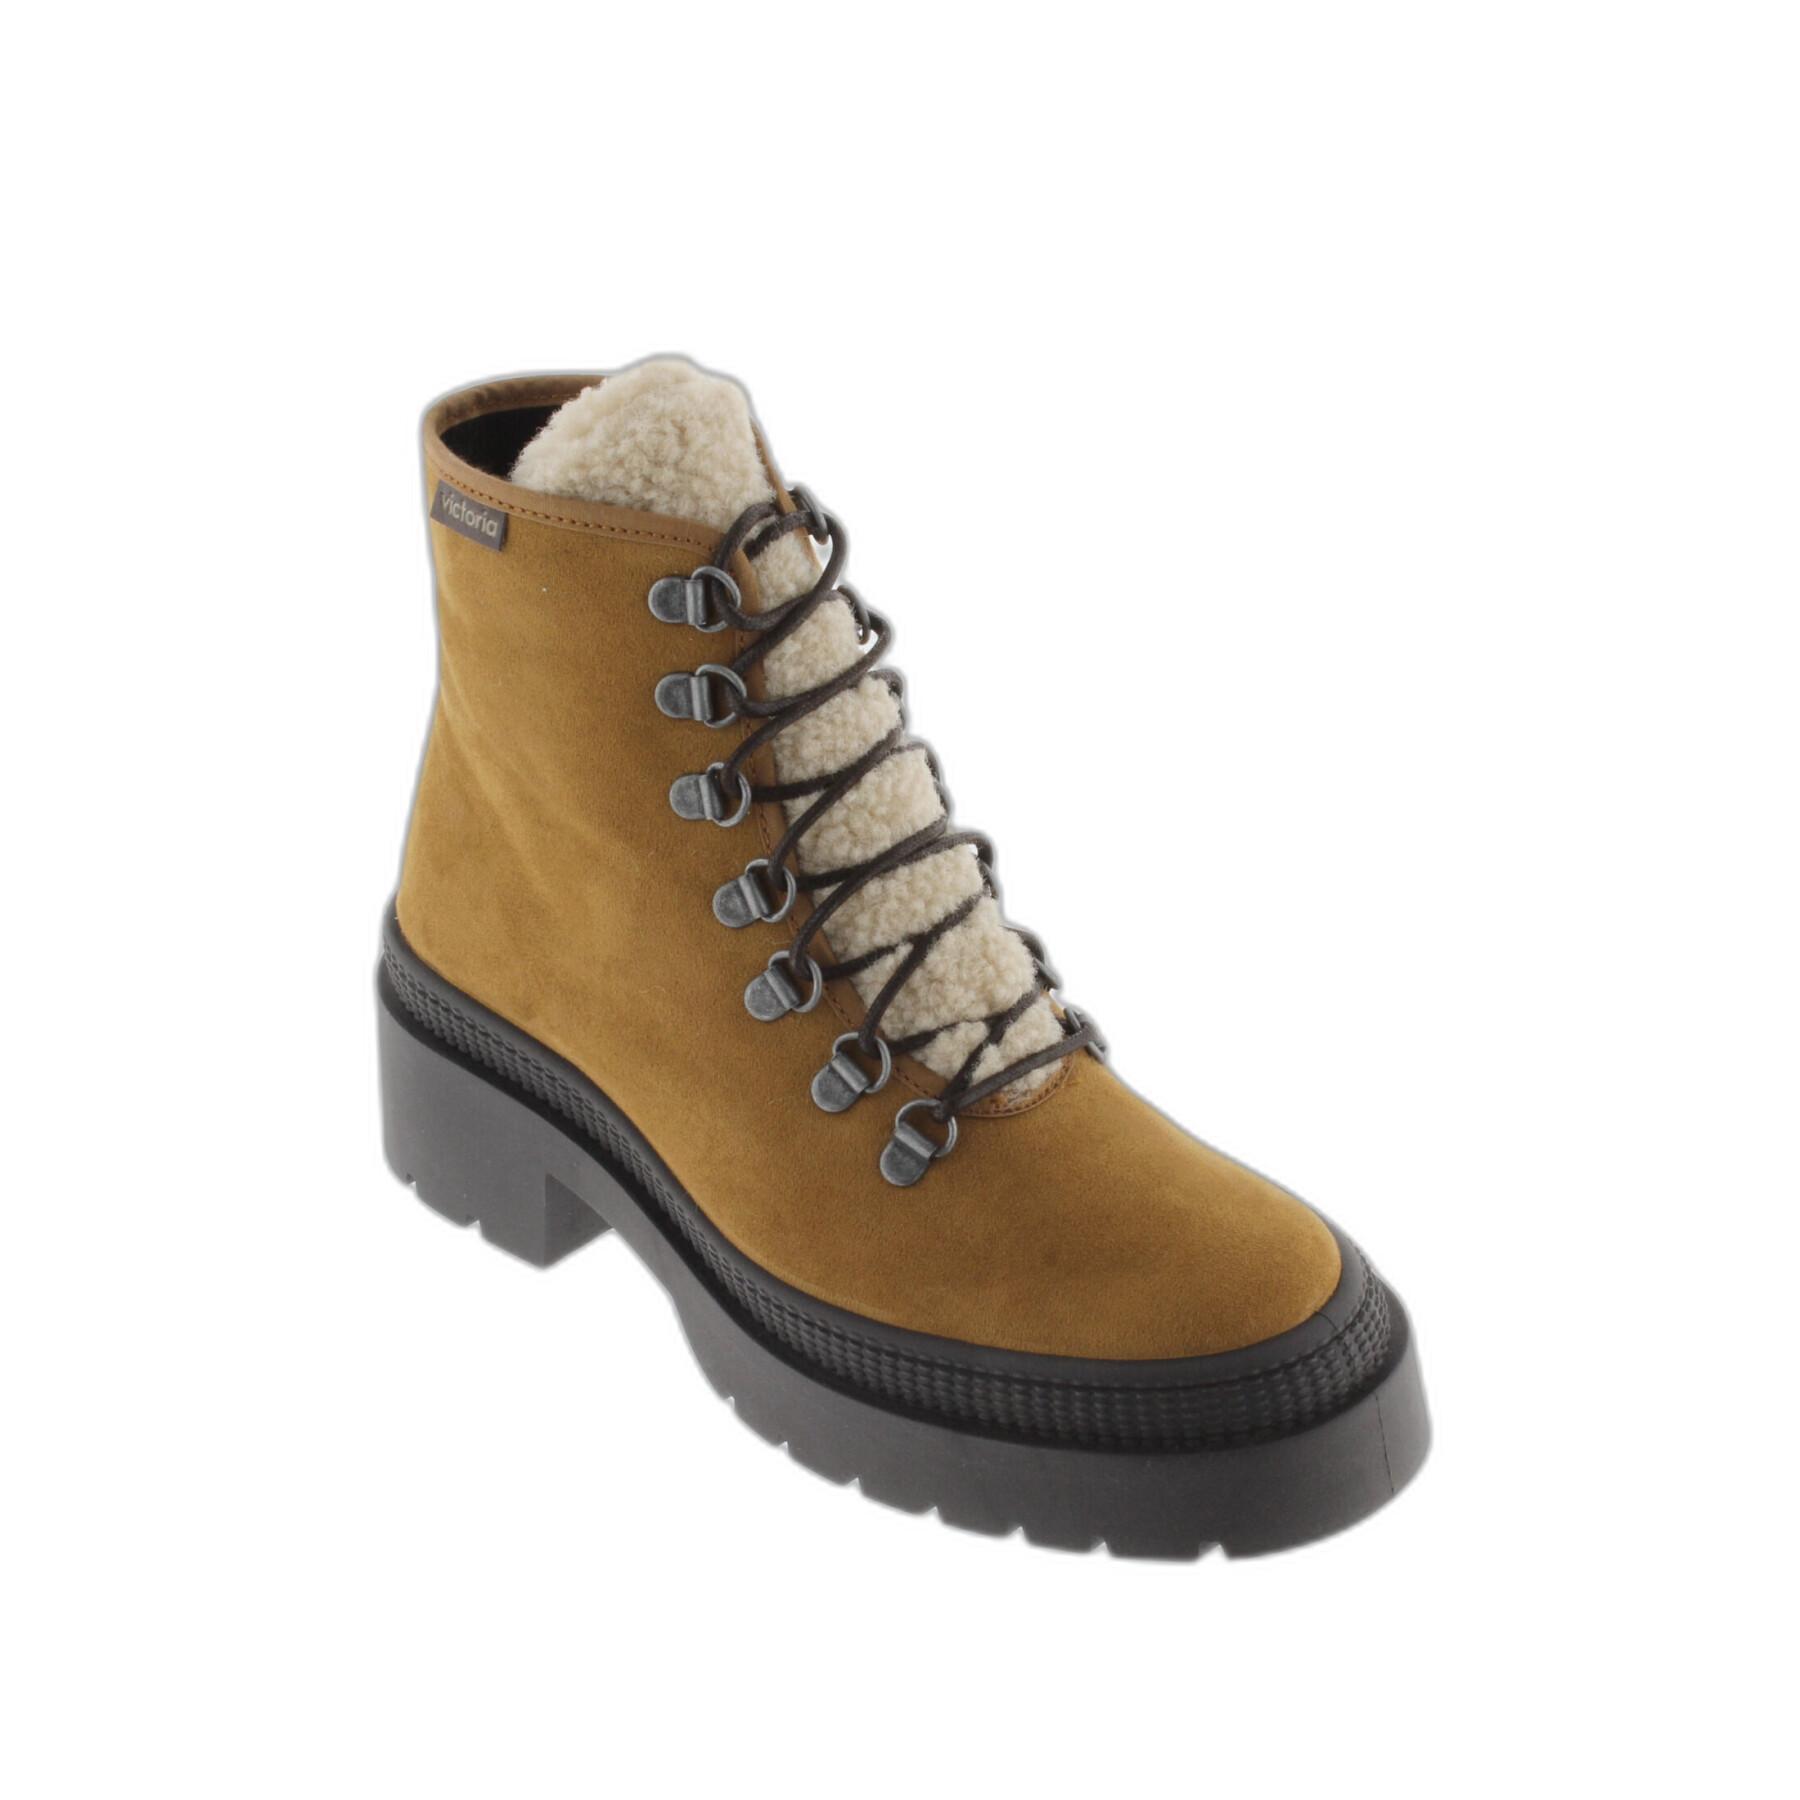 Faux suede and sheepskin boots for women Victoria Cielo